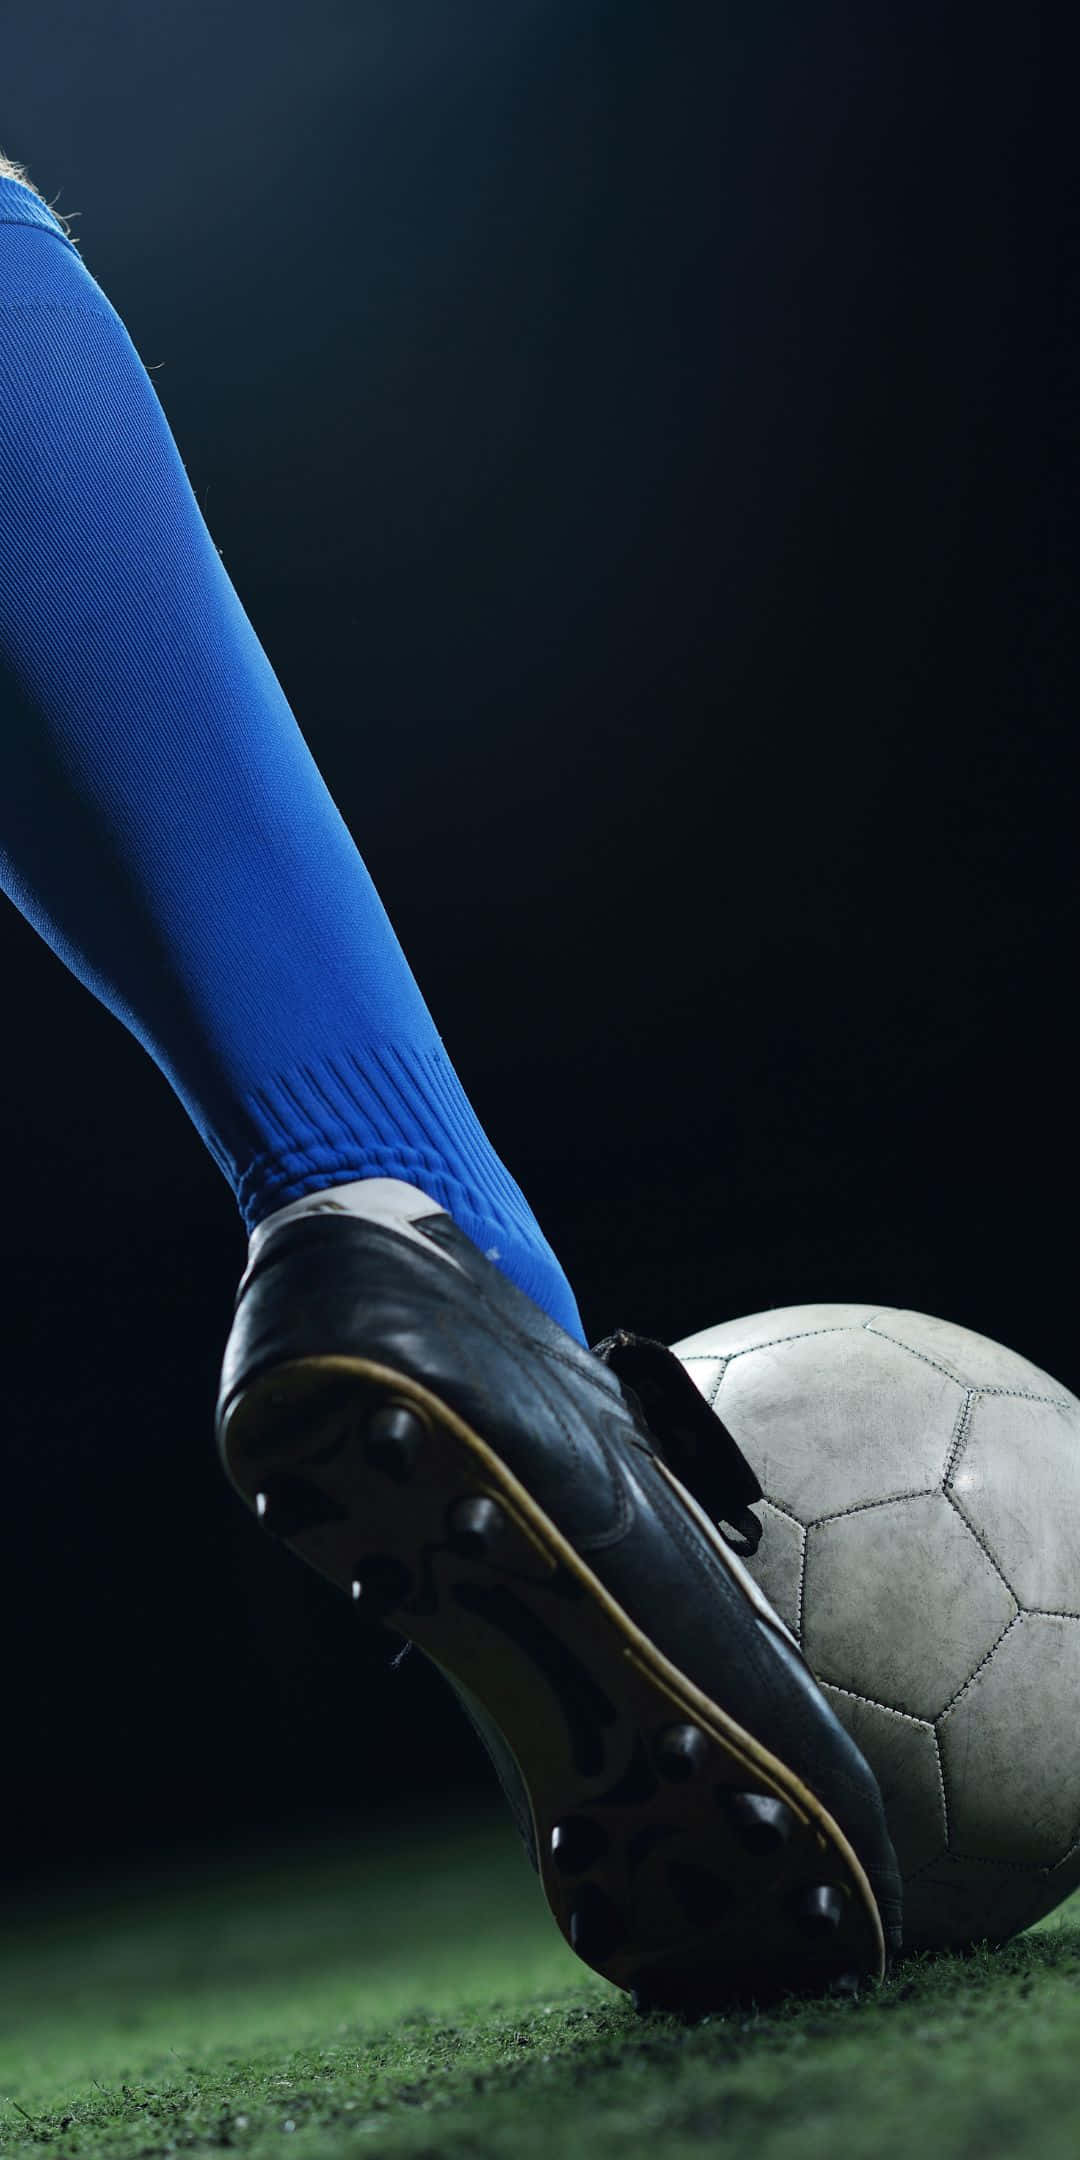 Foot Kicking The Ball Soccer Sports Background